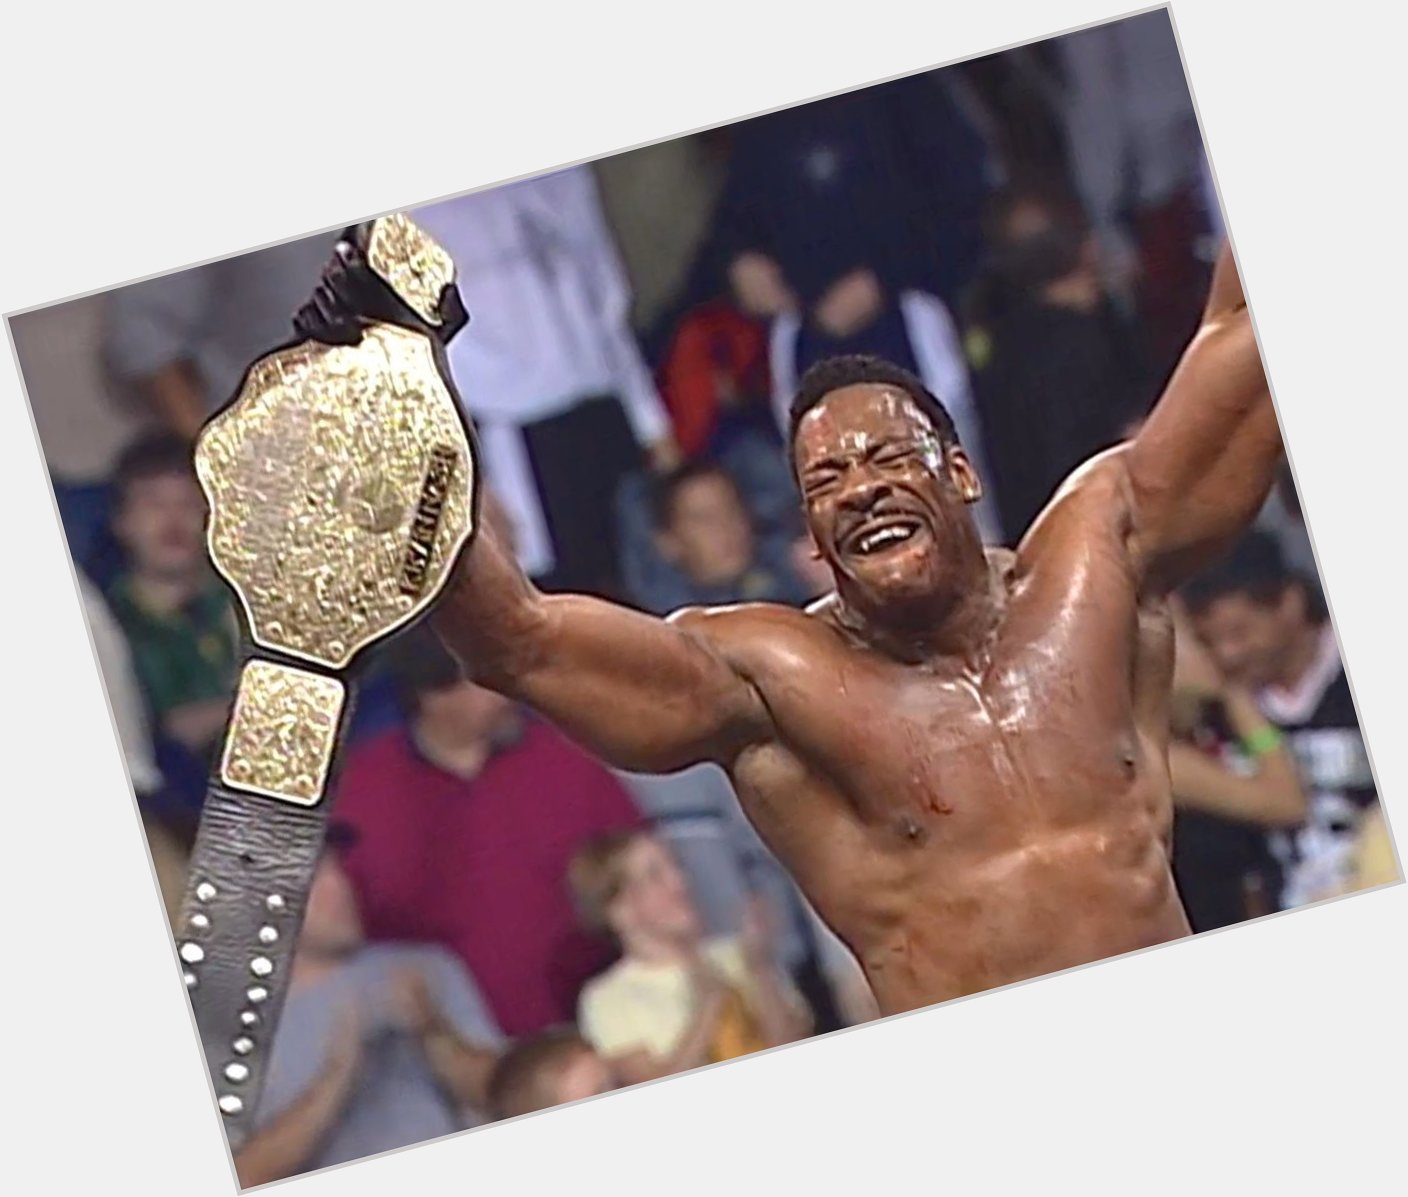 Happy Birthday to the legend Booker T   